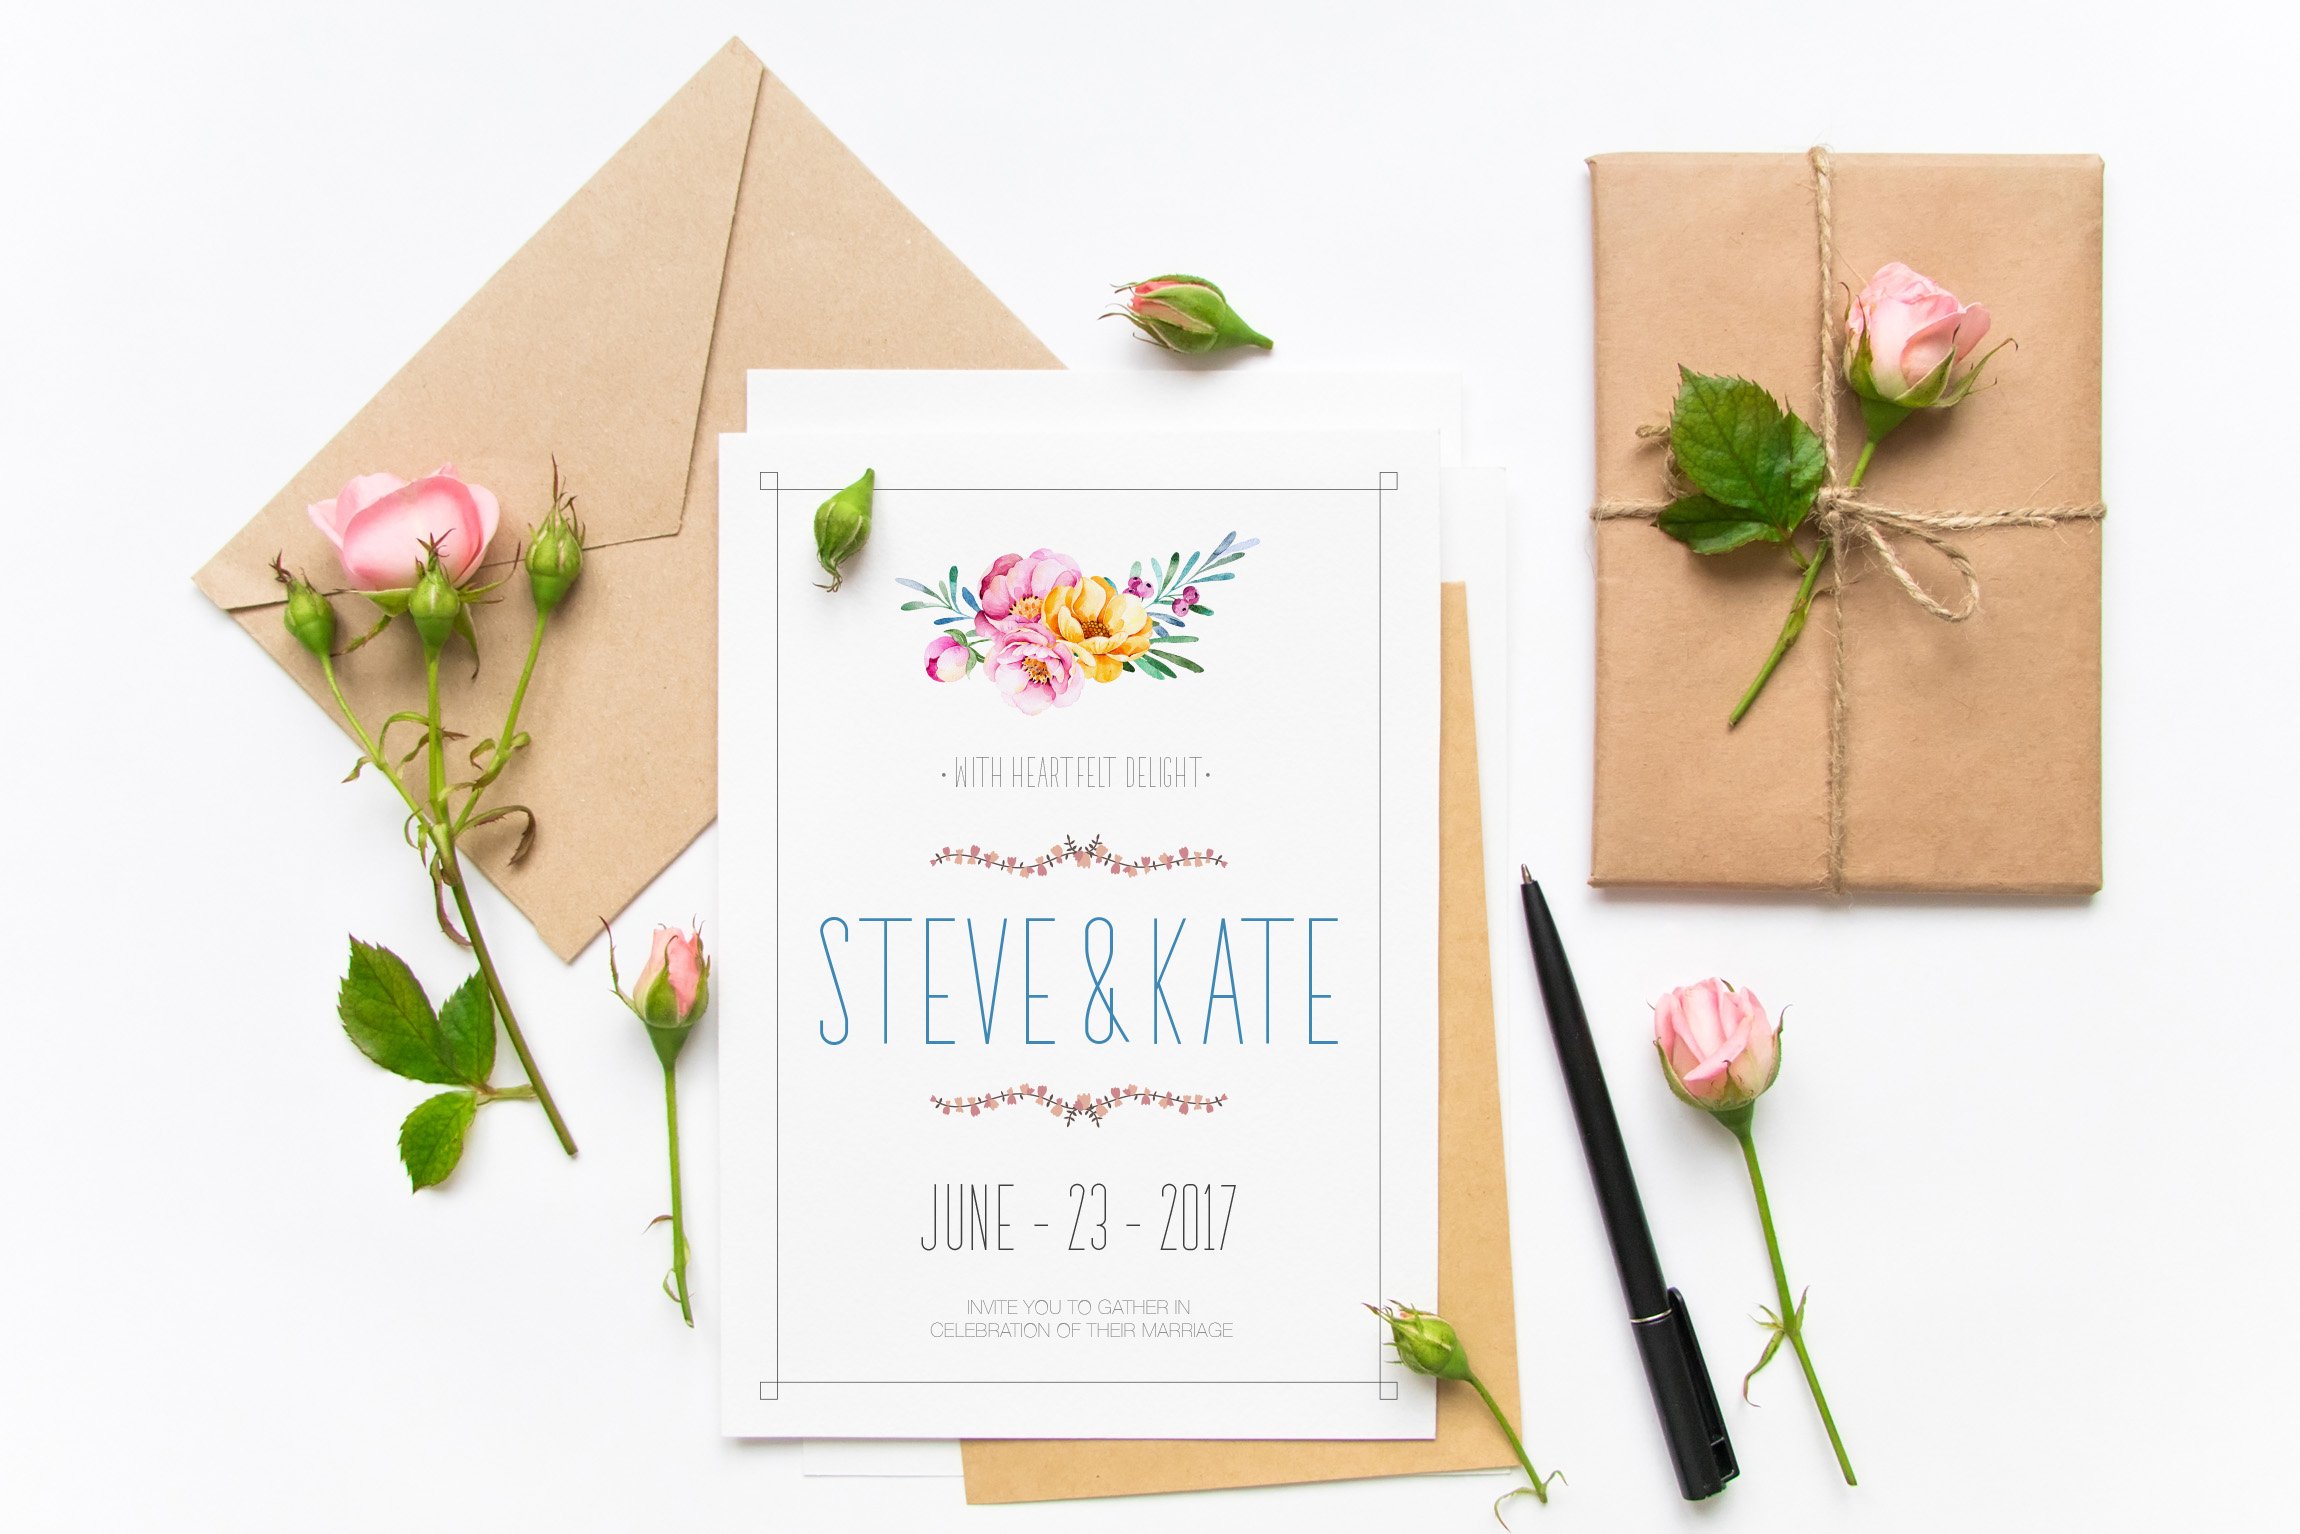 sprout minimal sans serif classic beautiful simple romantic wedding invitation condensed font sprout delicate thin design typeface typography title headline4 845